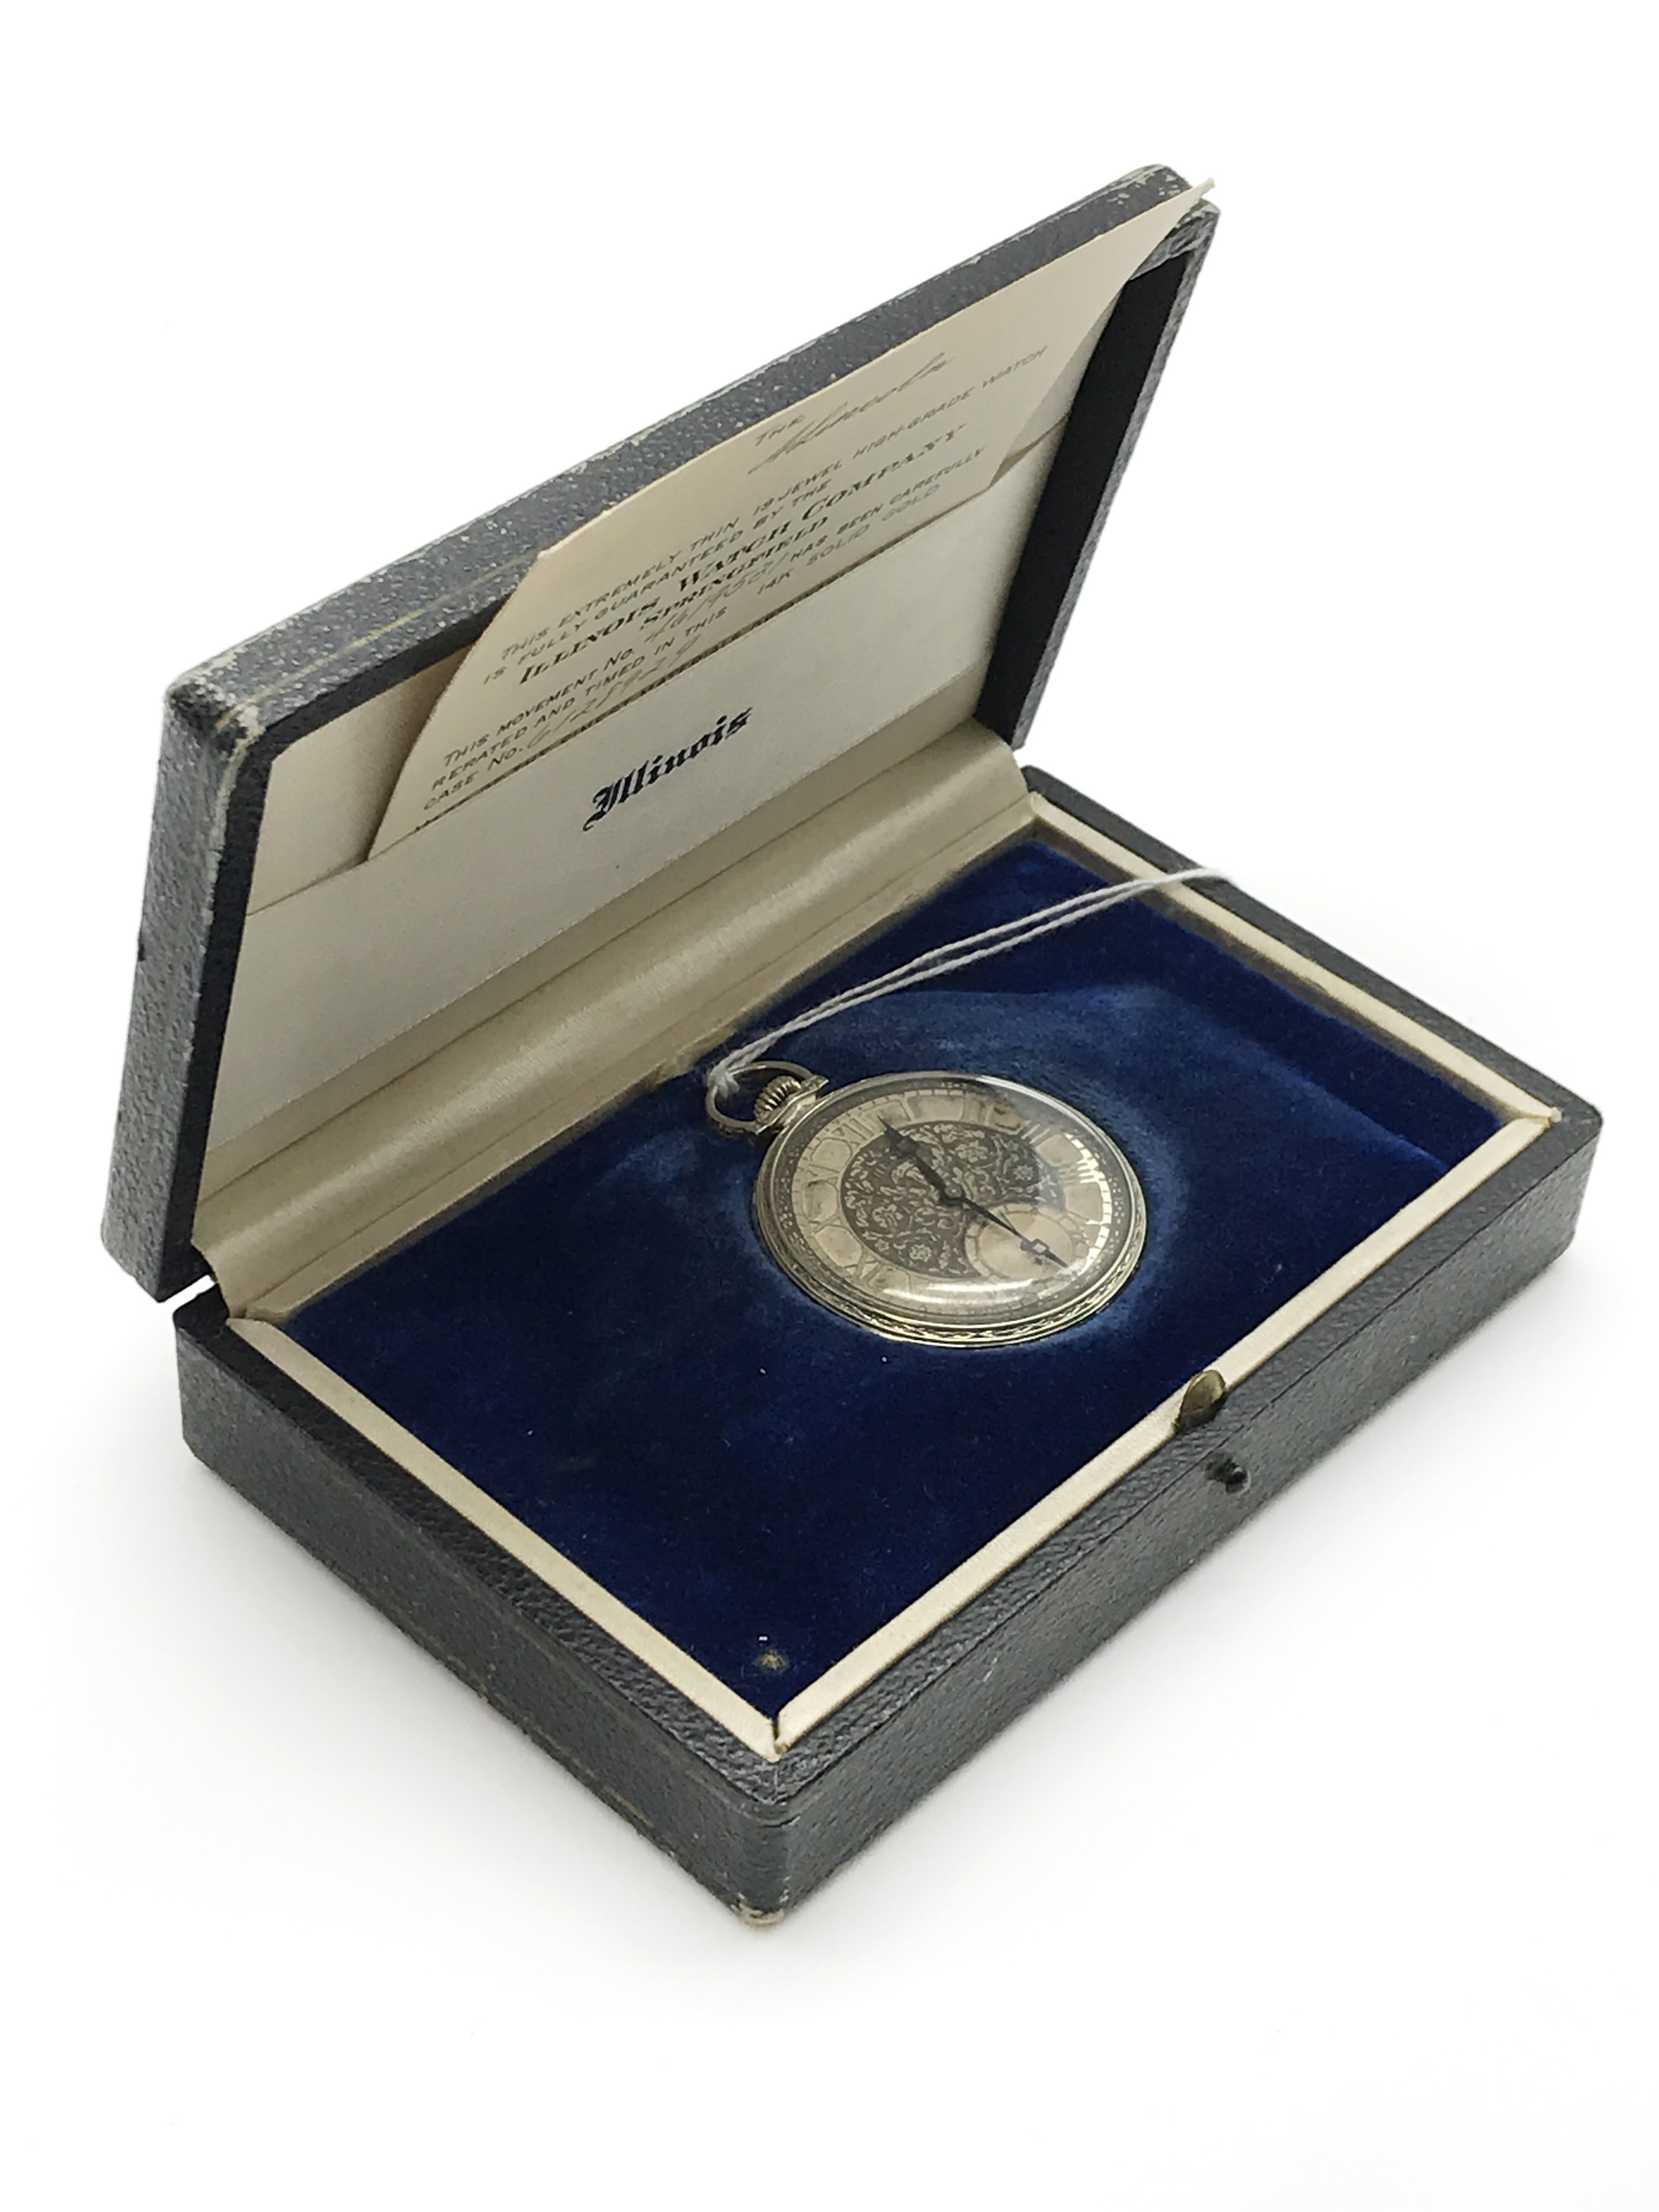 14 CARAT WHITE GOLD POCKET WATCH IN WORKING CONDITION - Image 2 of 10